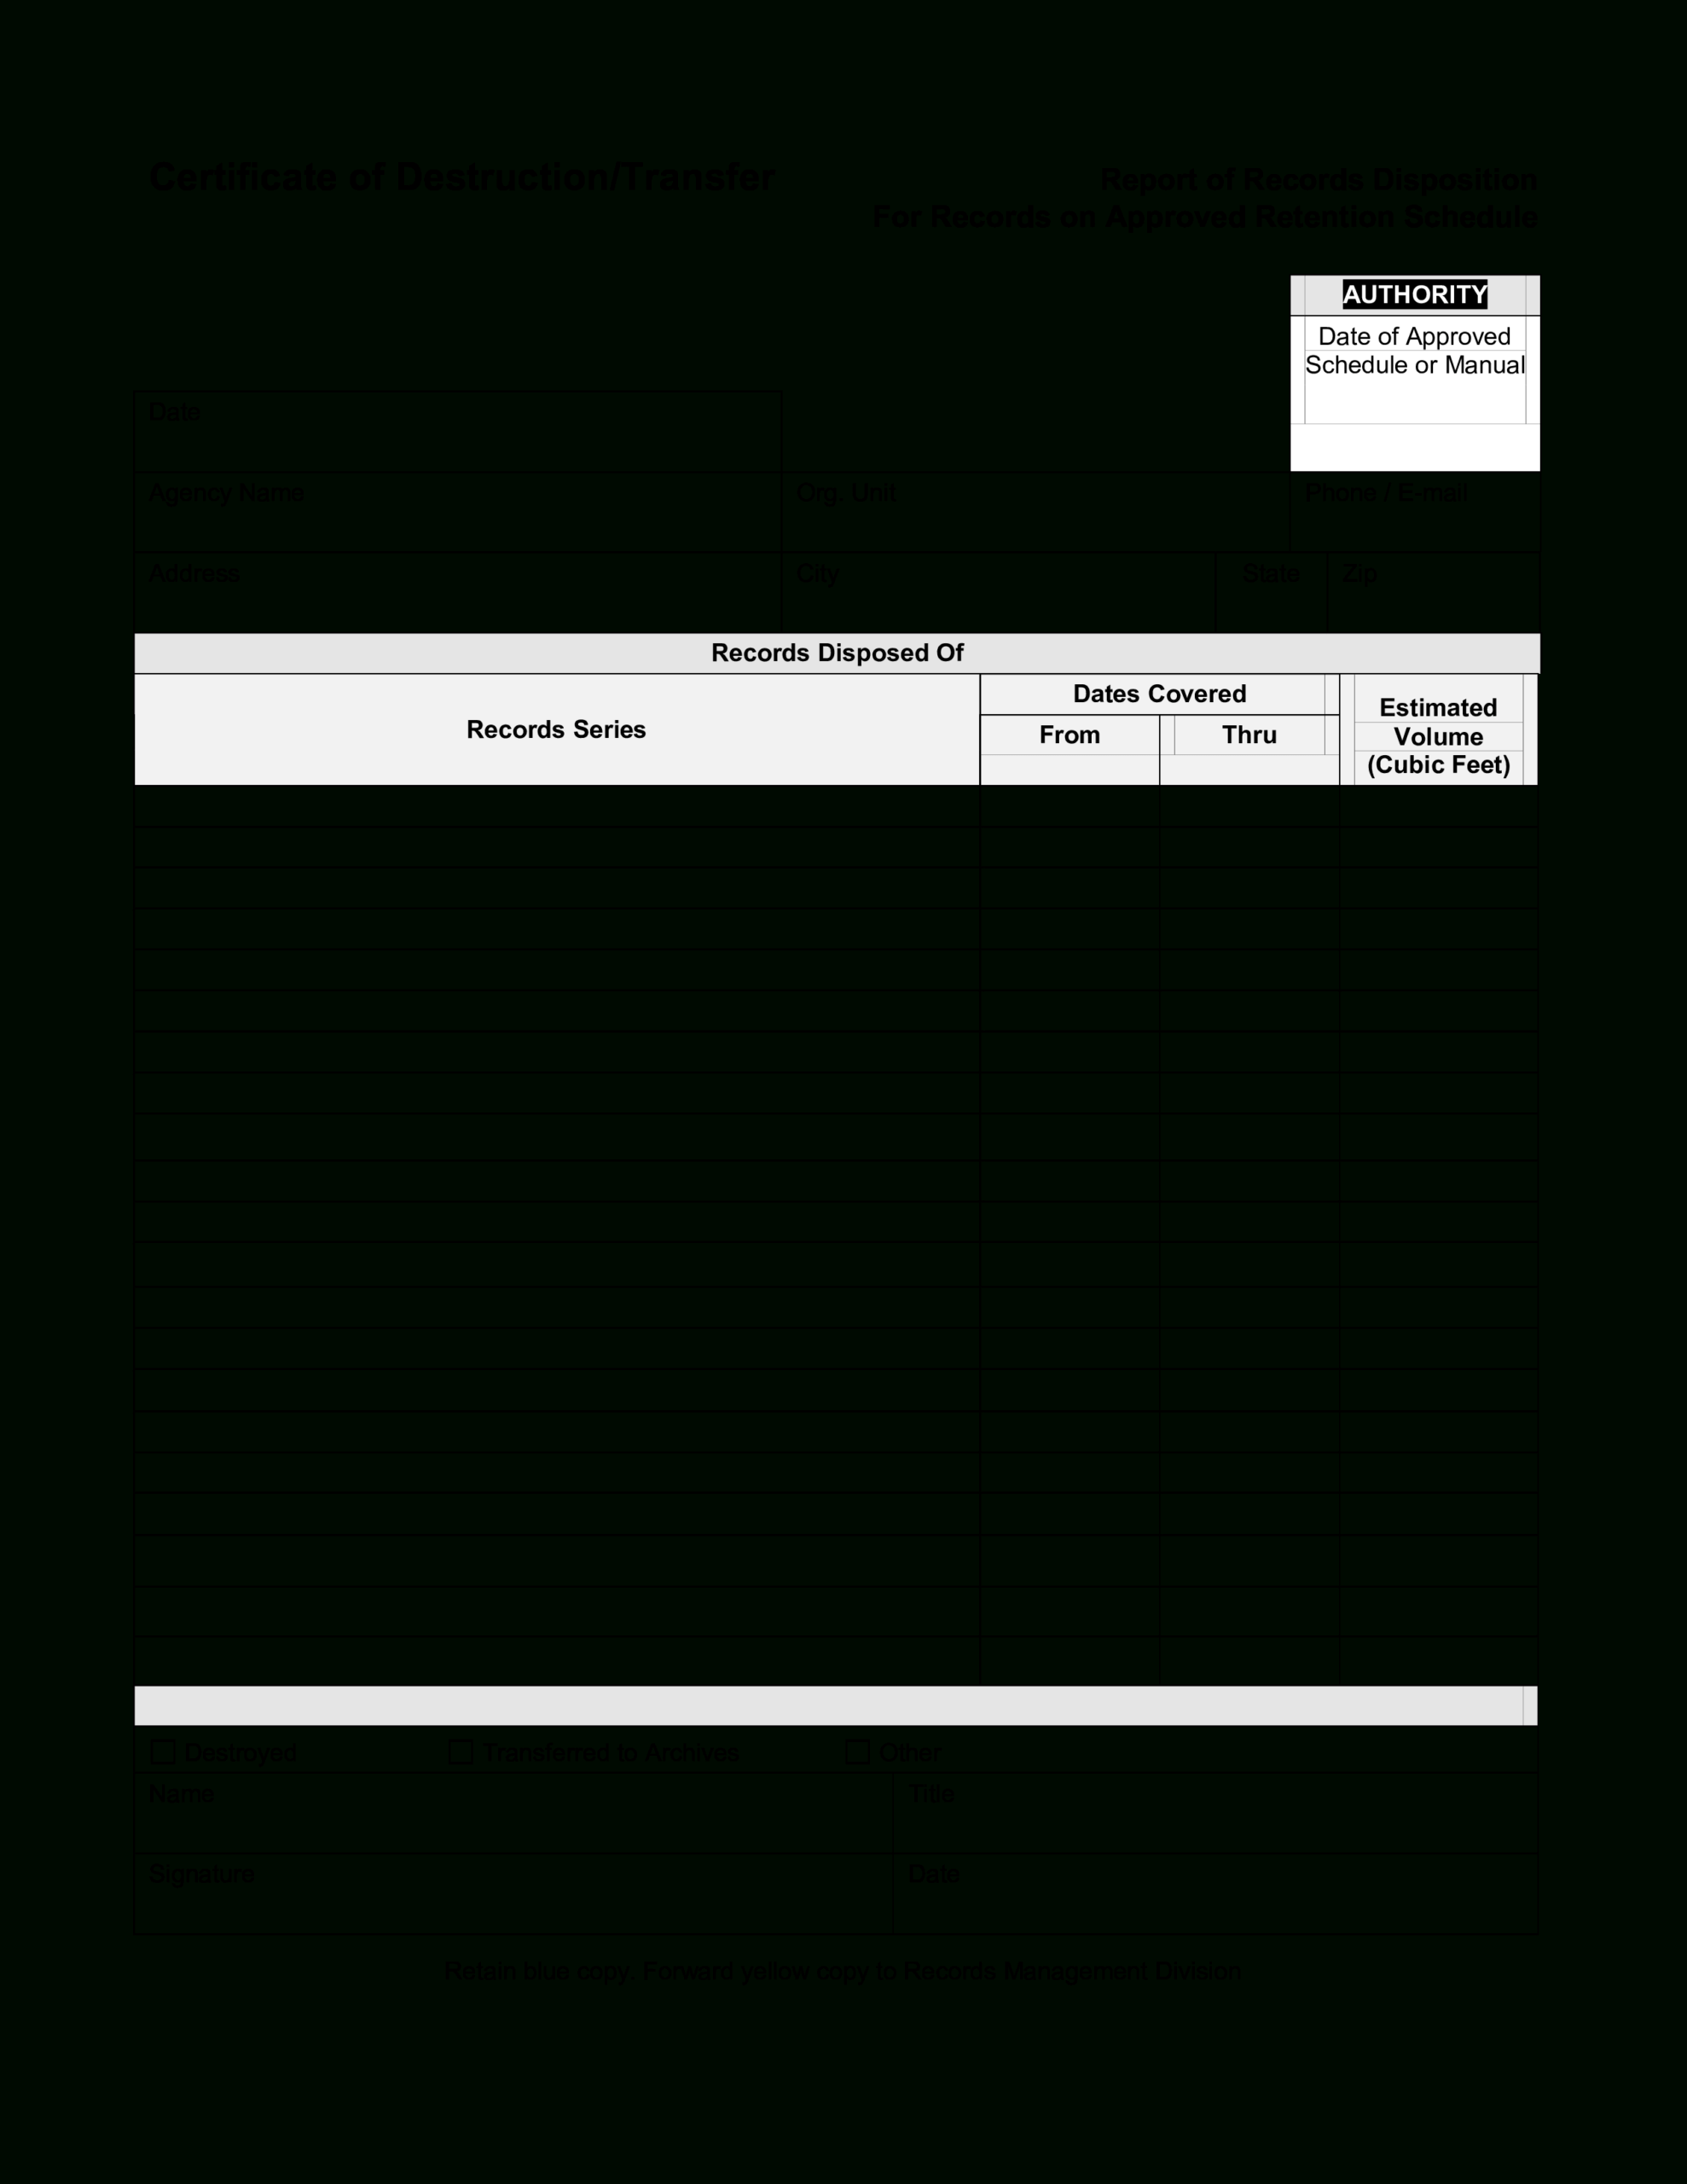 Blank Certificate Of Destruction | Templates At For Certificate Of Destruction Template